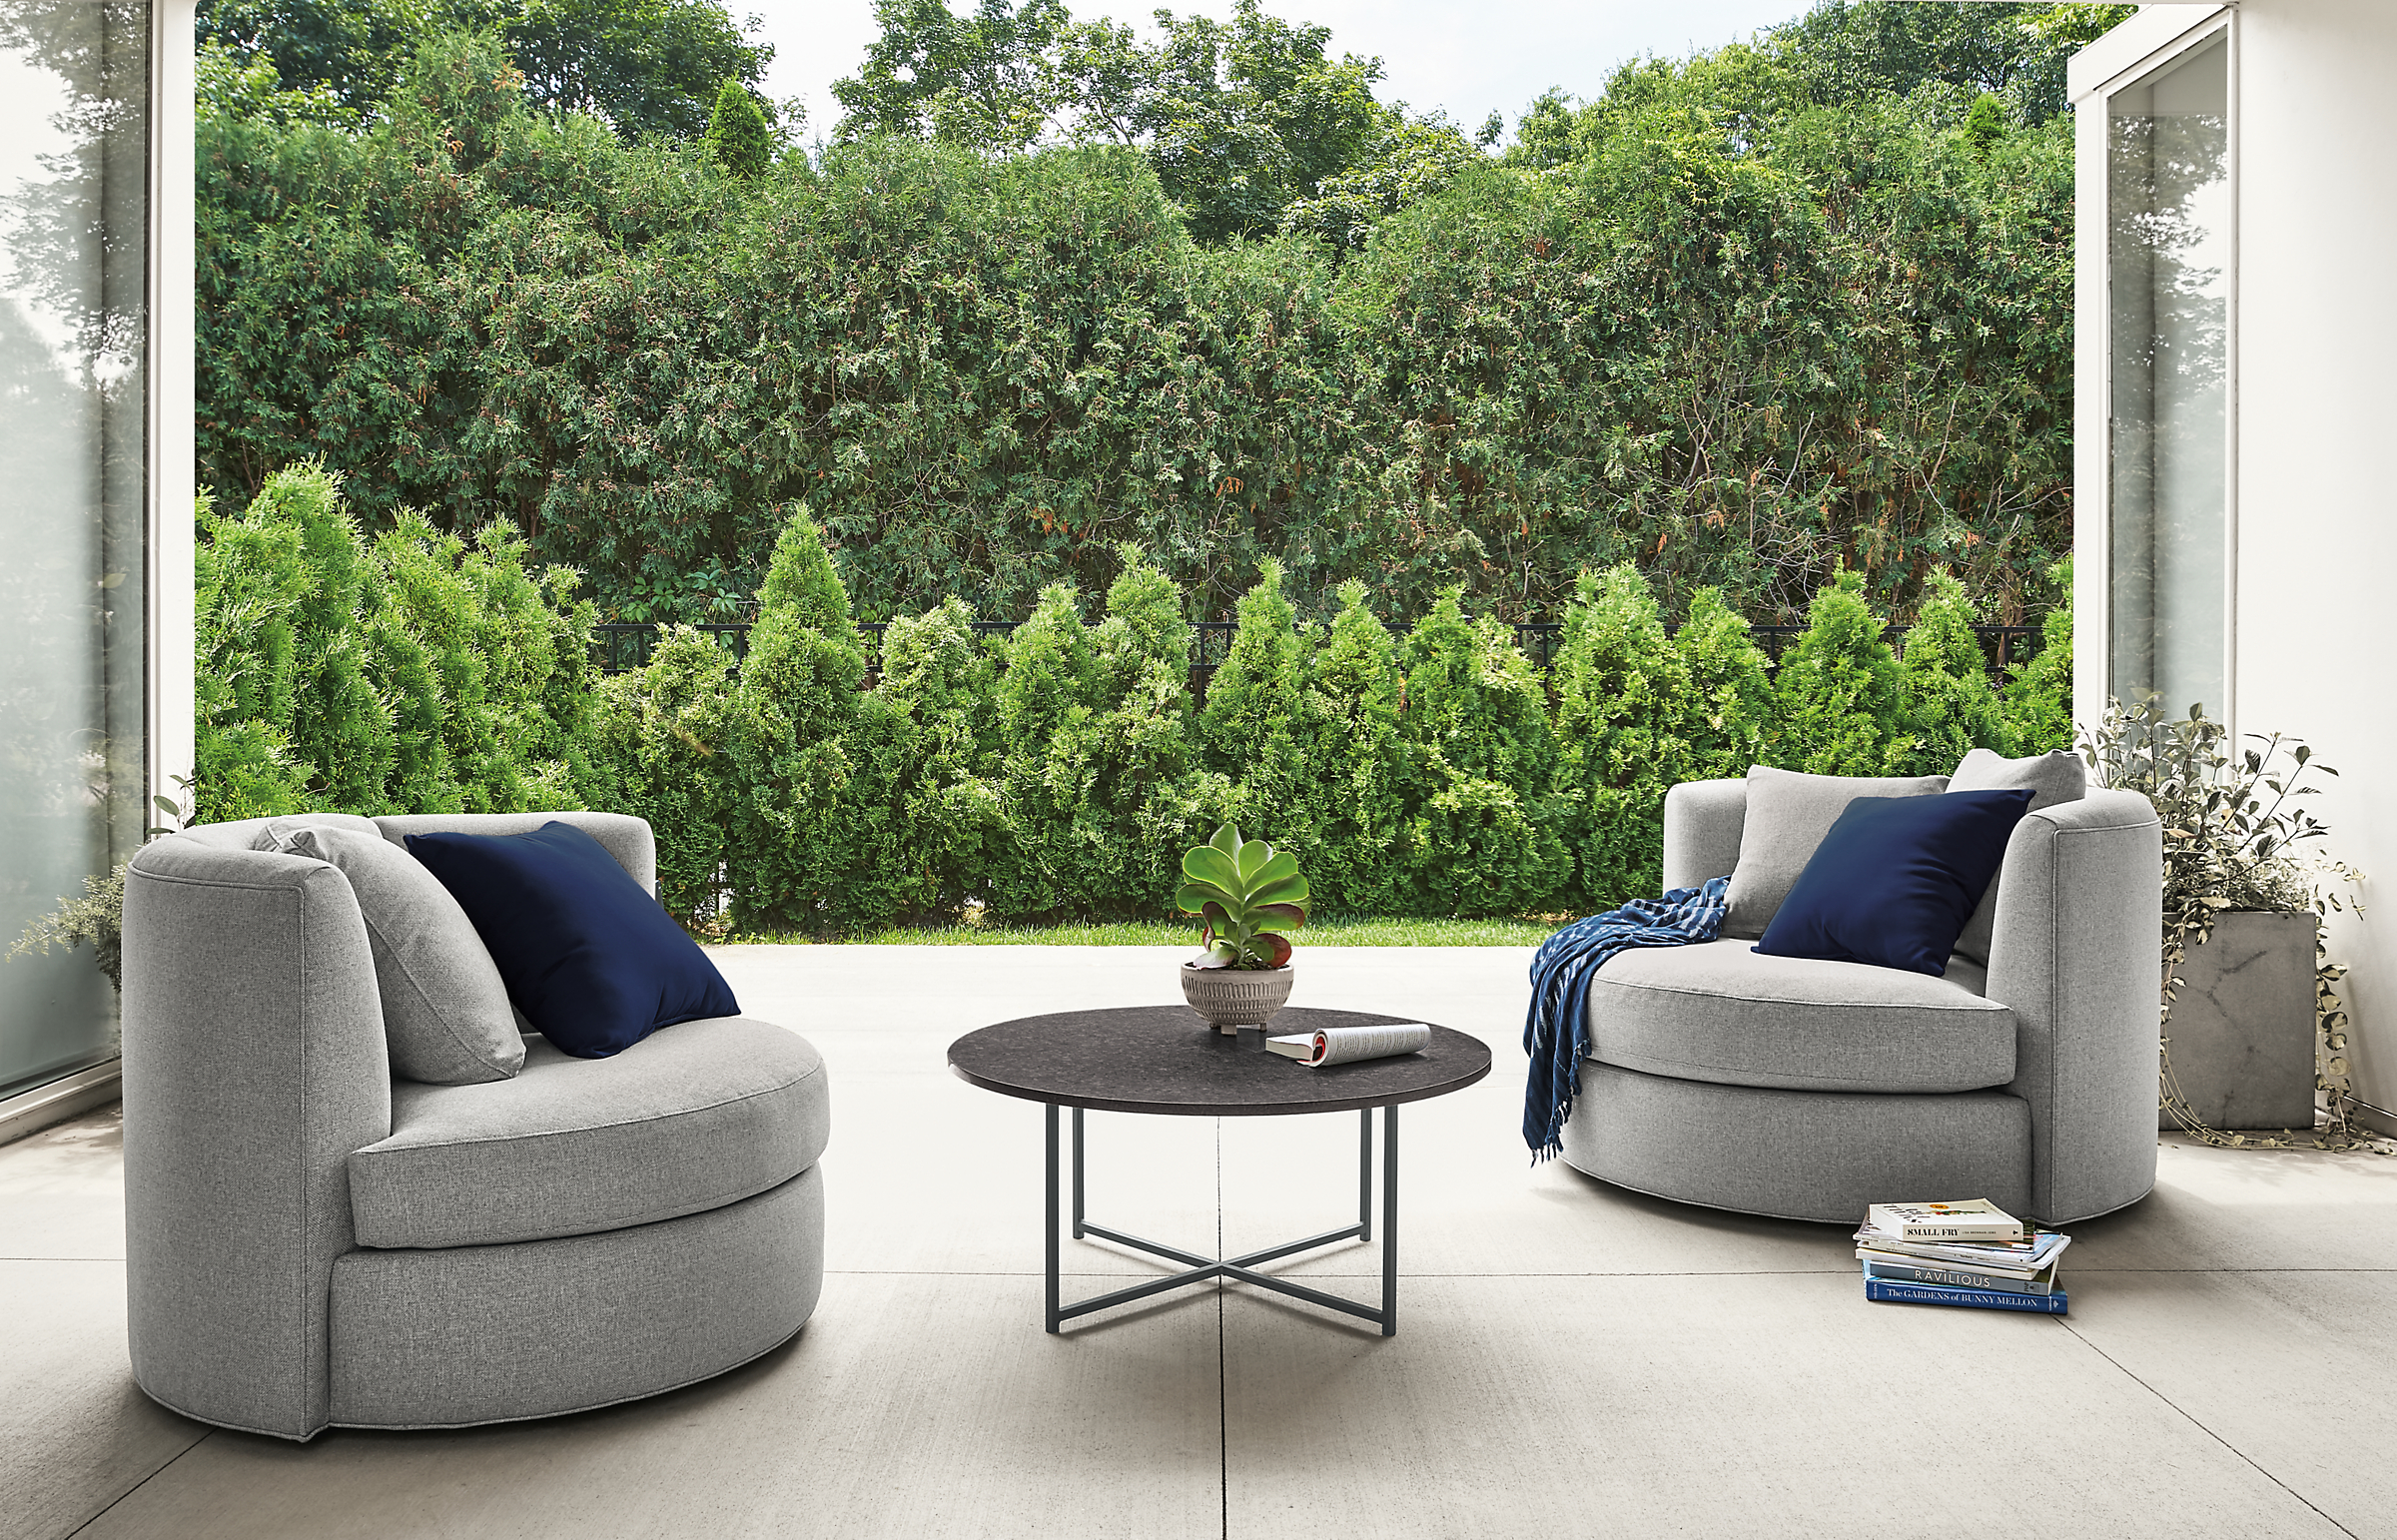 Detail of 2 Alcove swivel chairs in mist steel on patio.